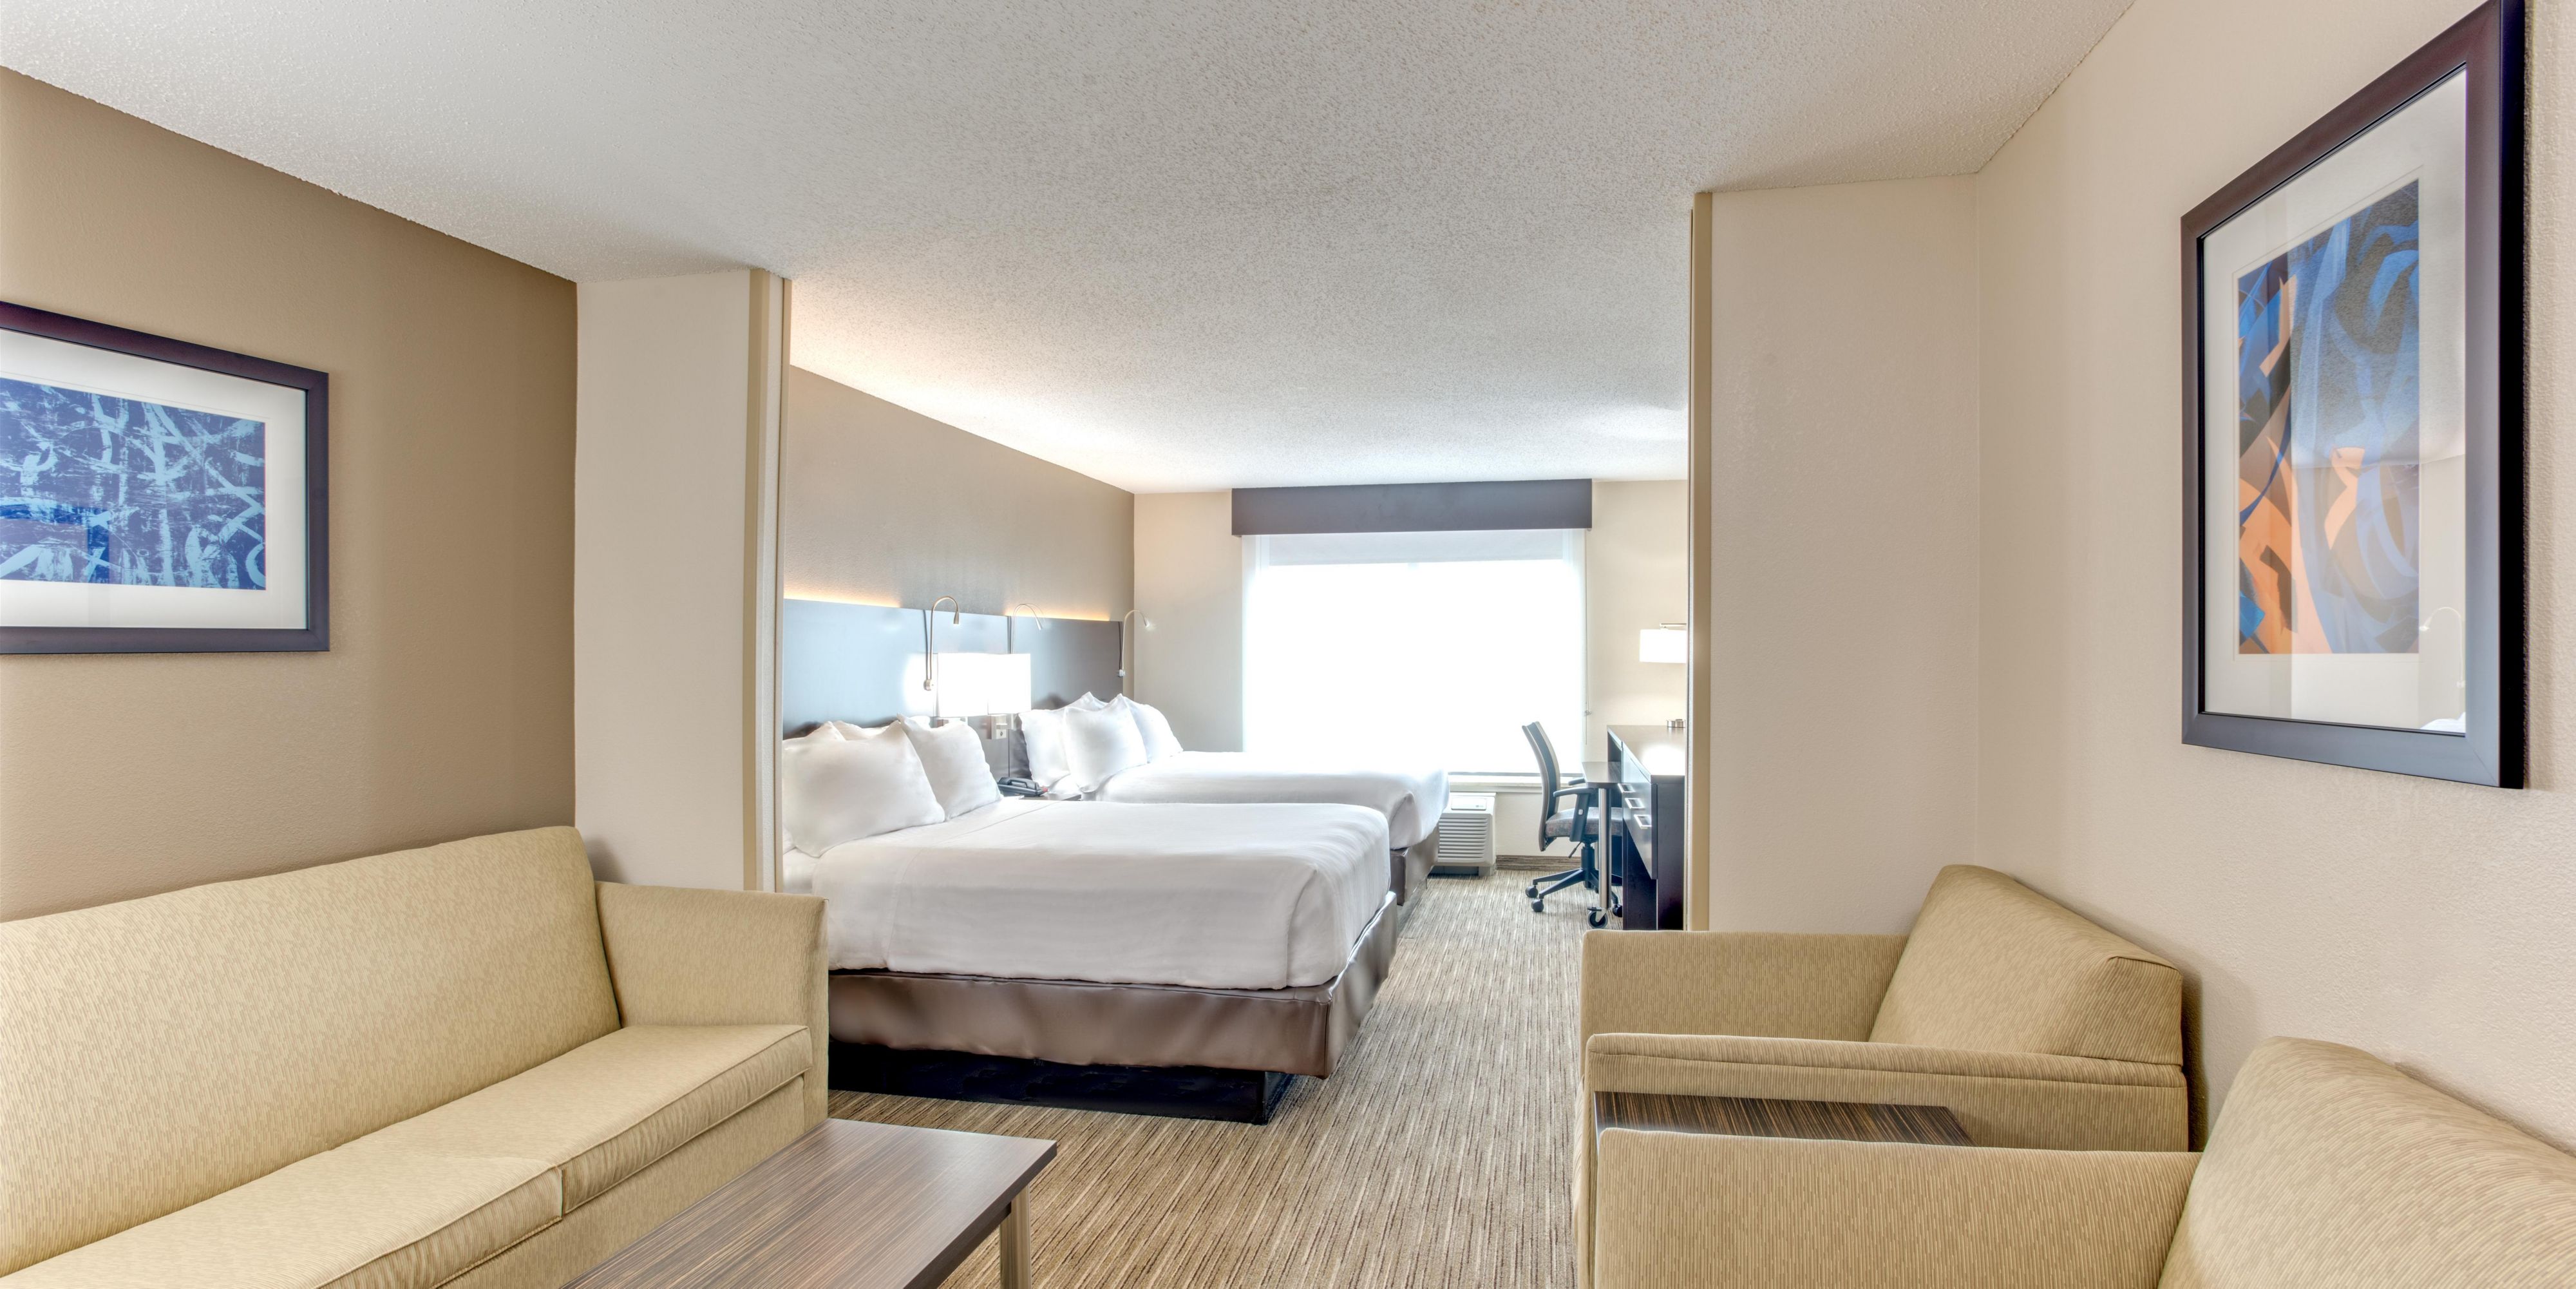 Our hotels offers Suite style rooms which is perfect for groups and families, providing space for everyone! 